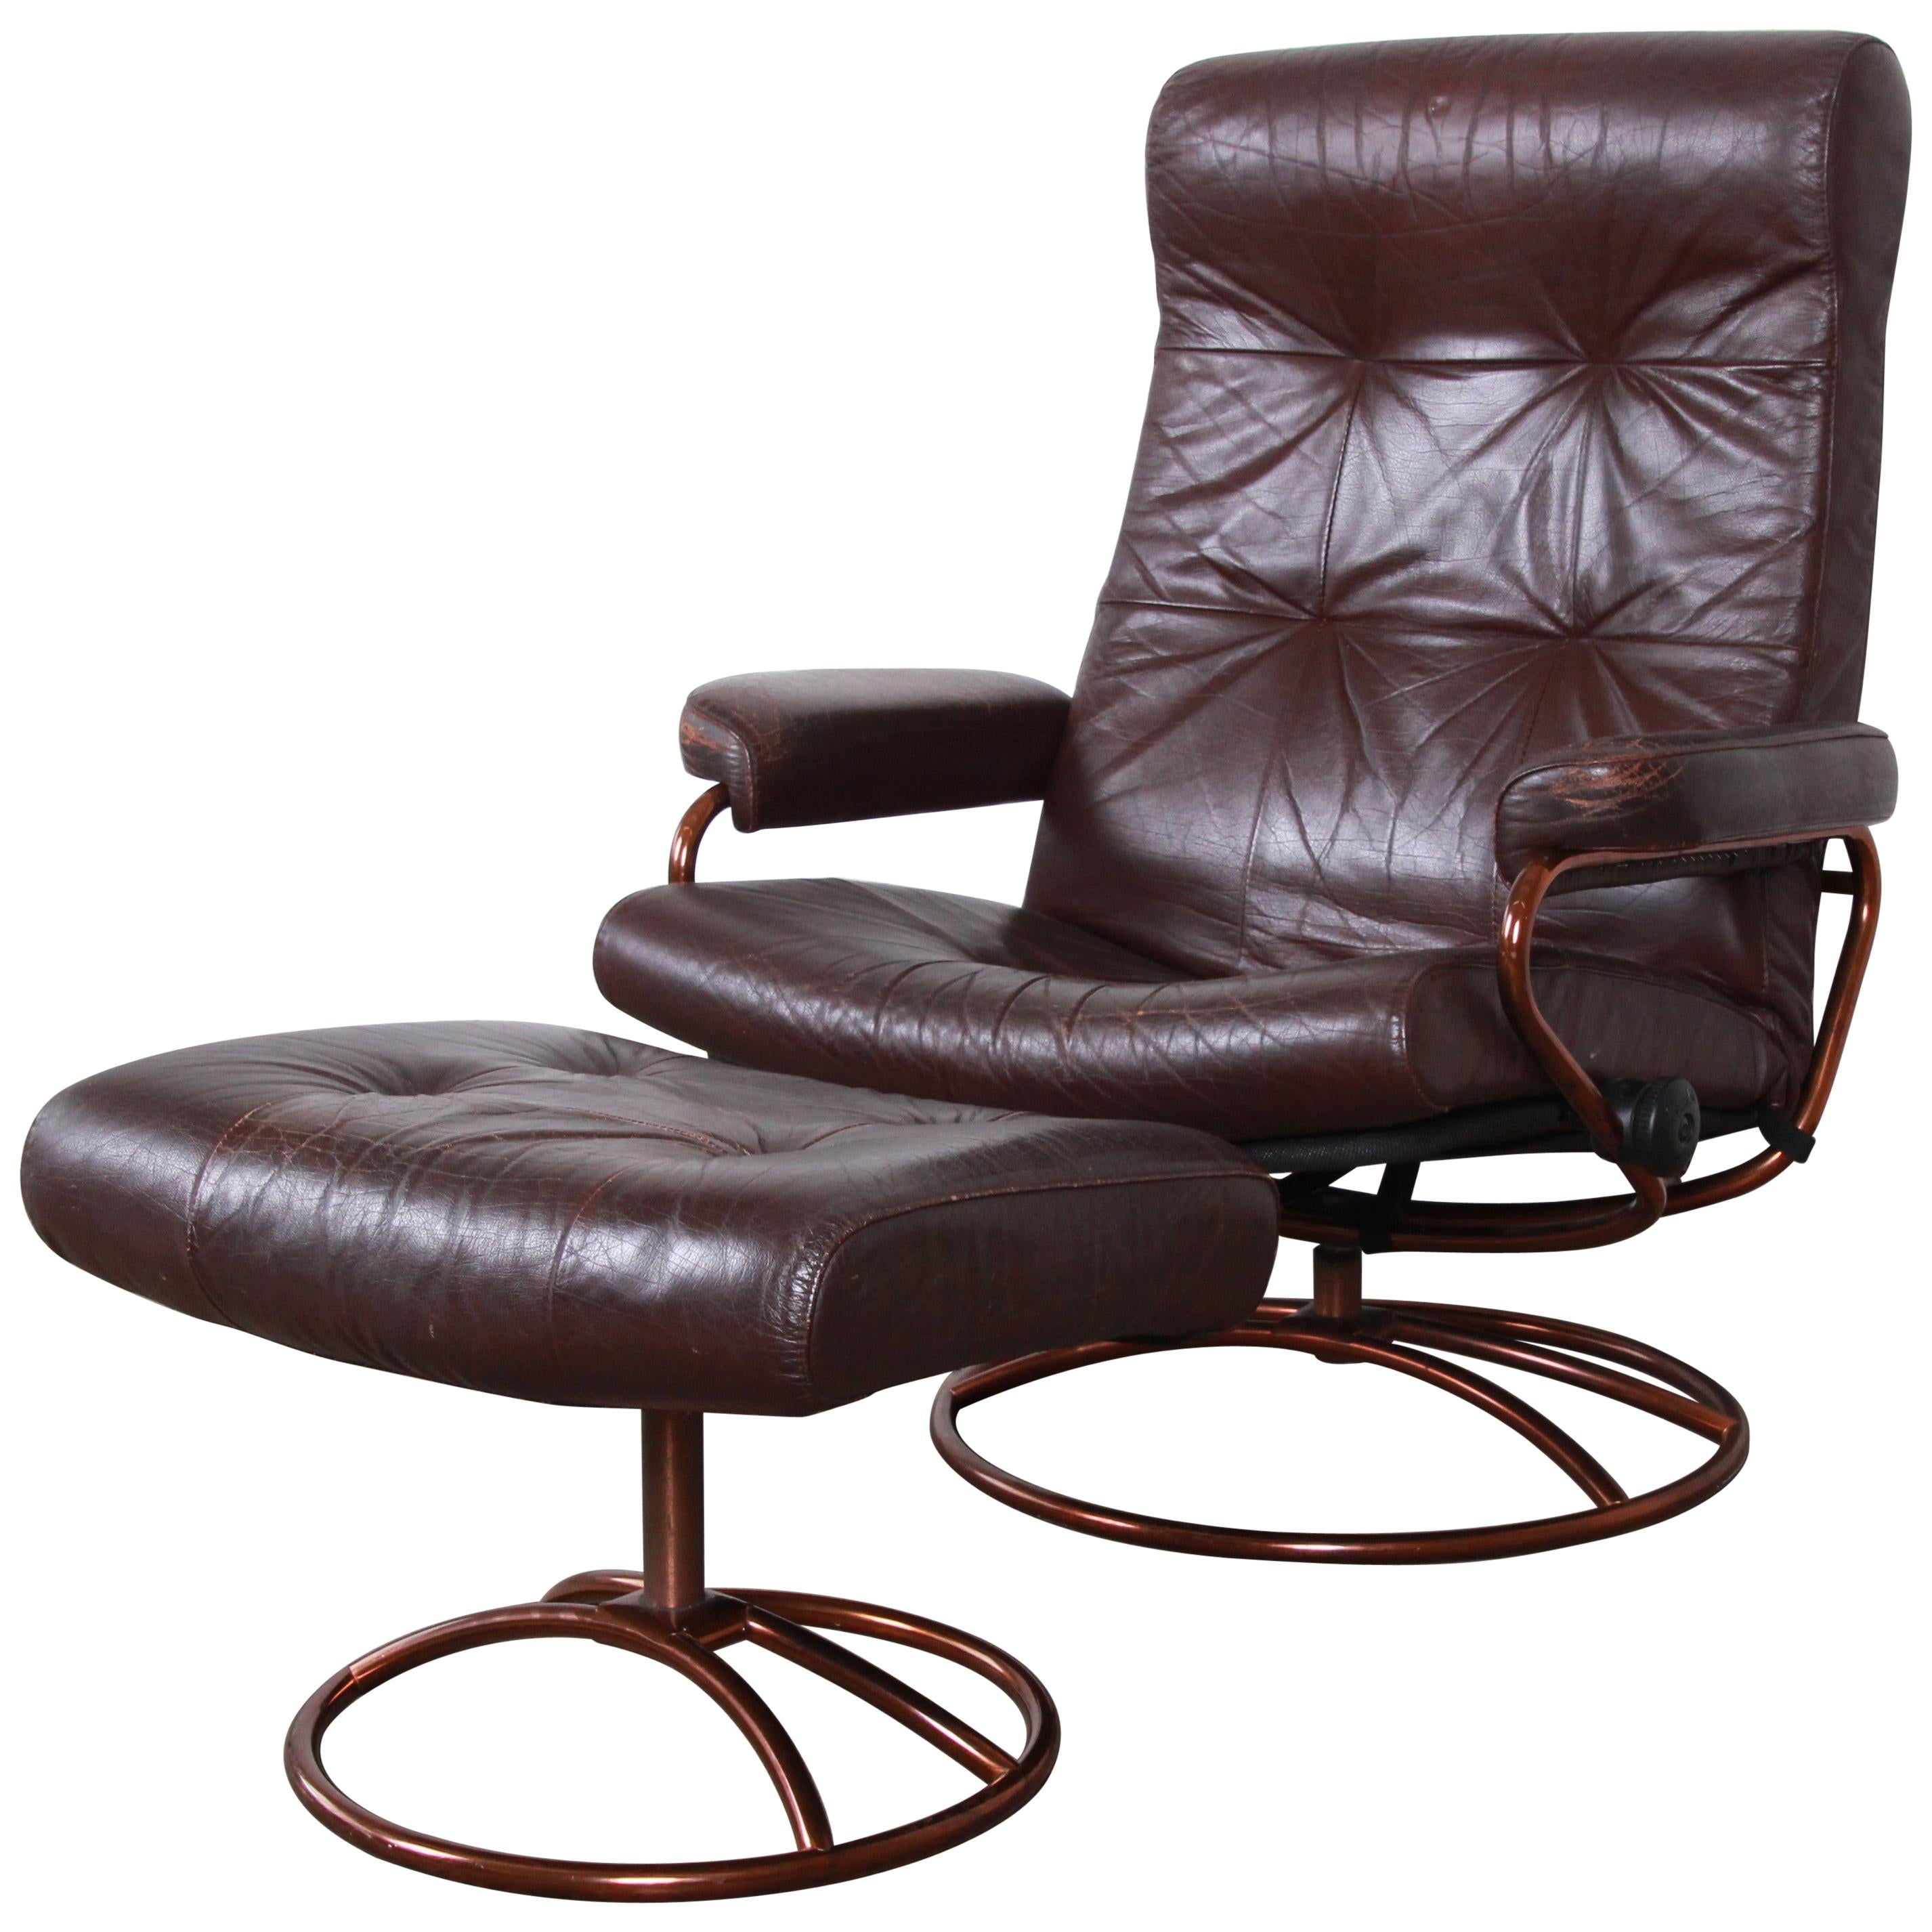 Ekornes Stressless Brown Leather Lounge Chair and Ottoman